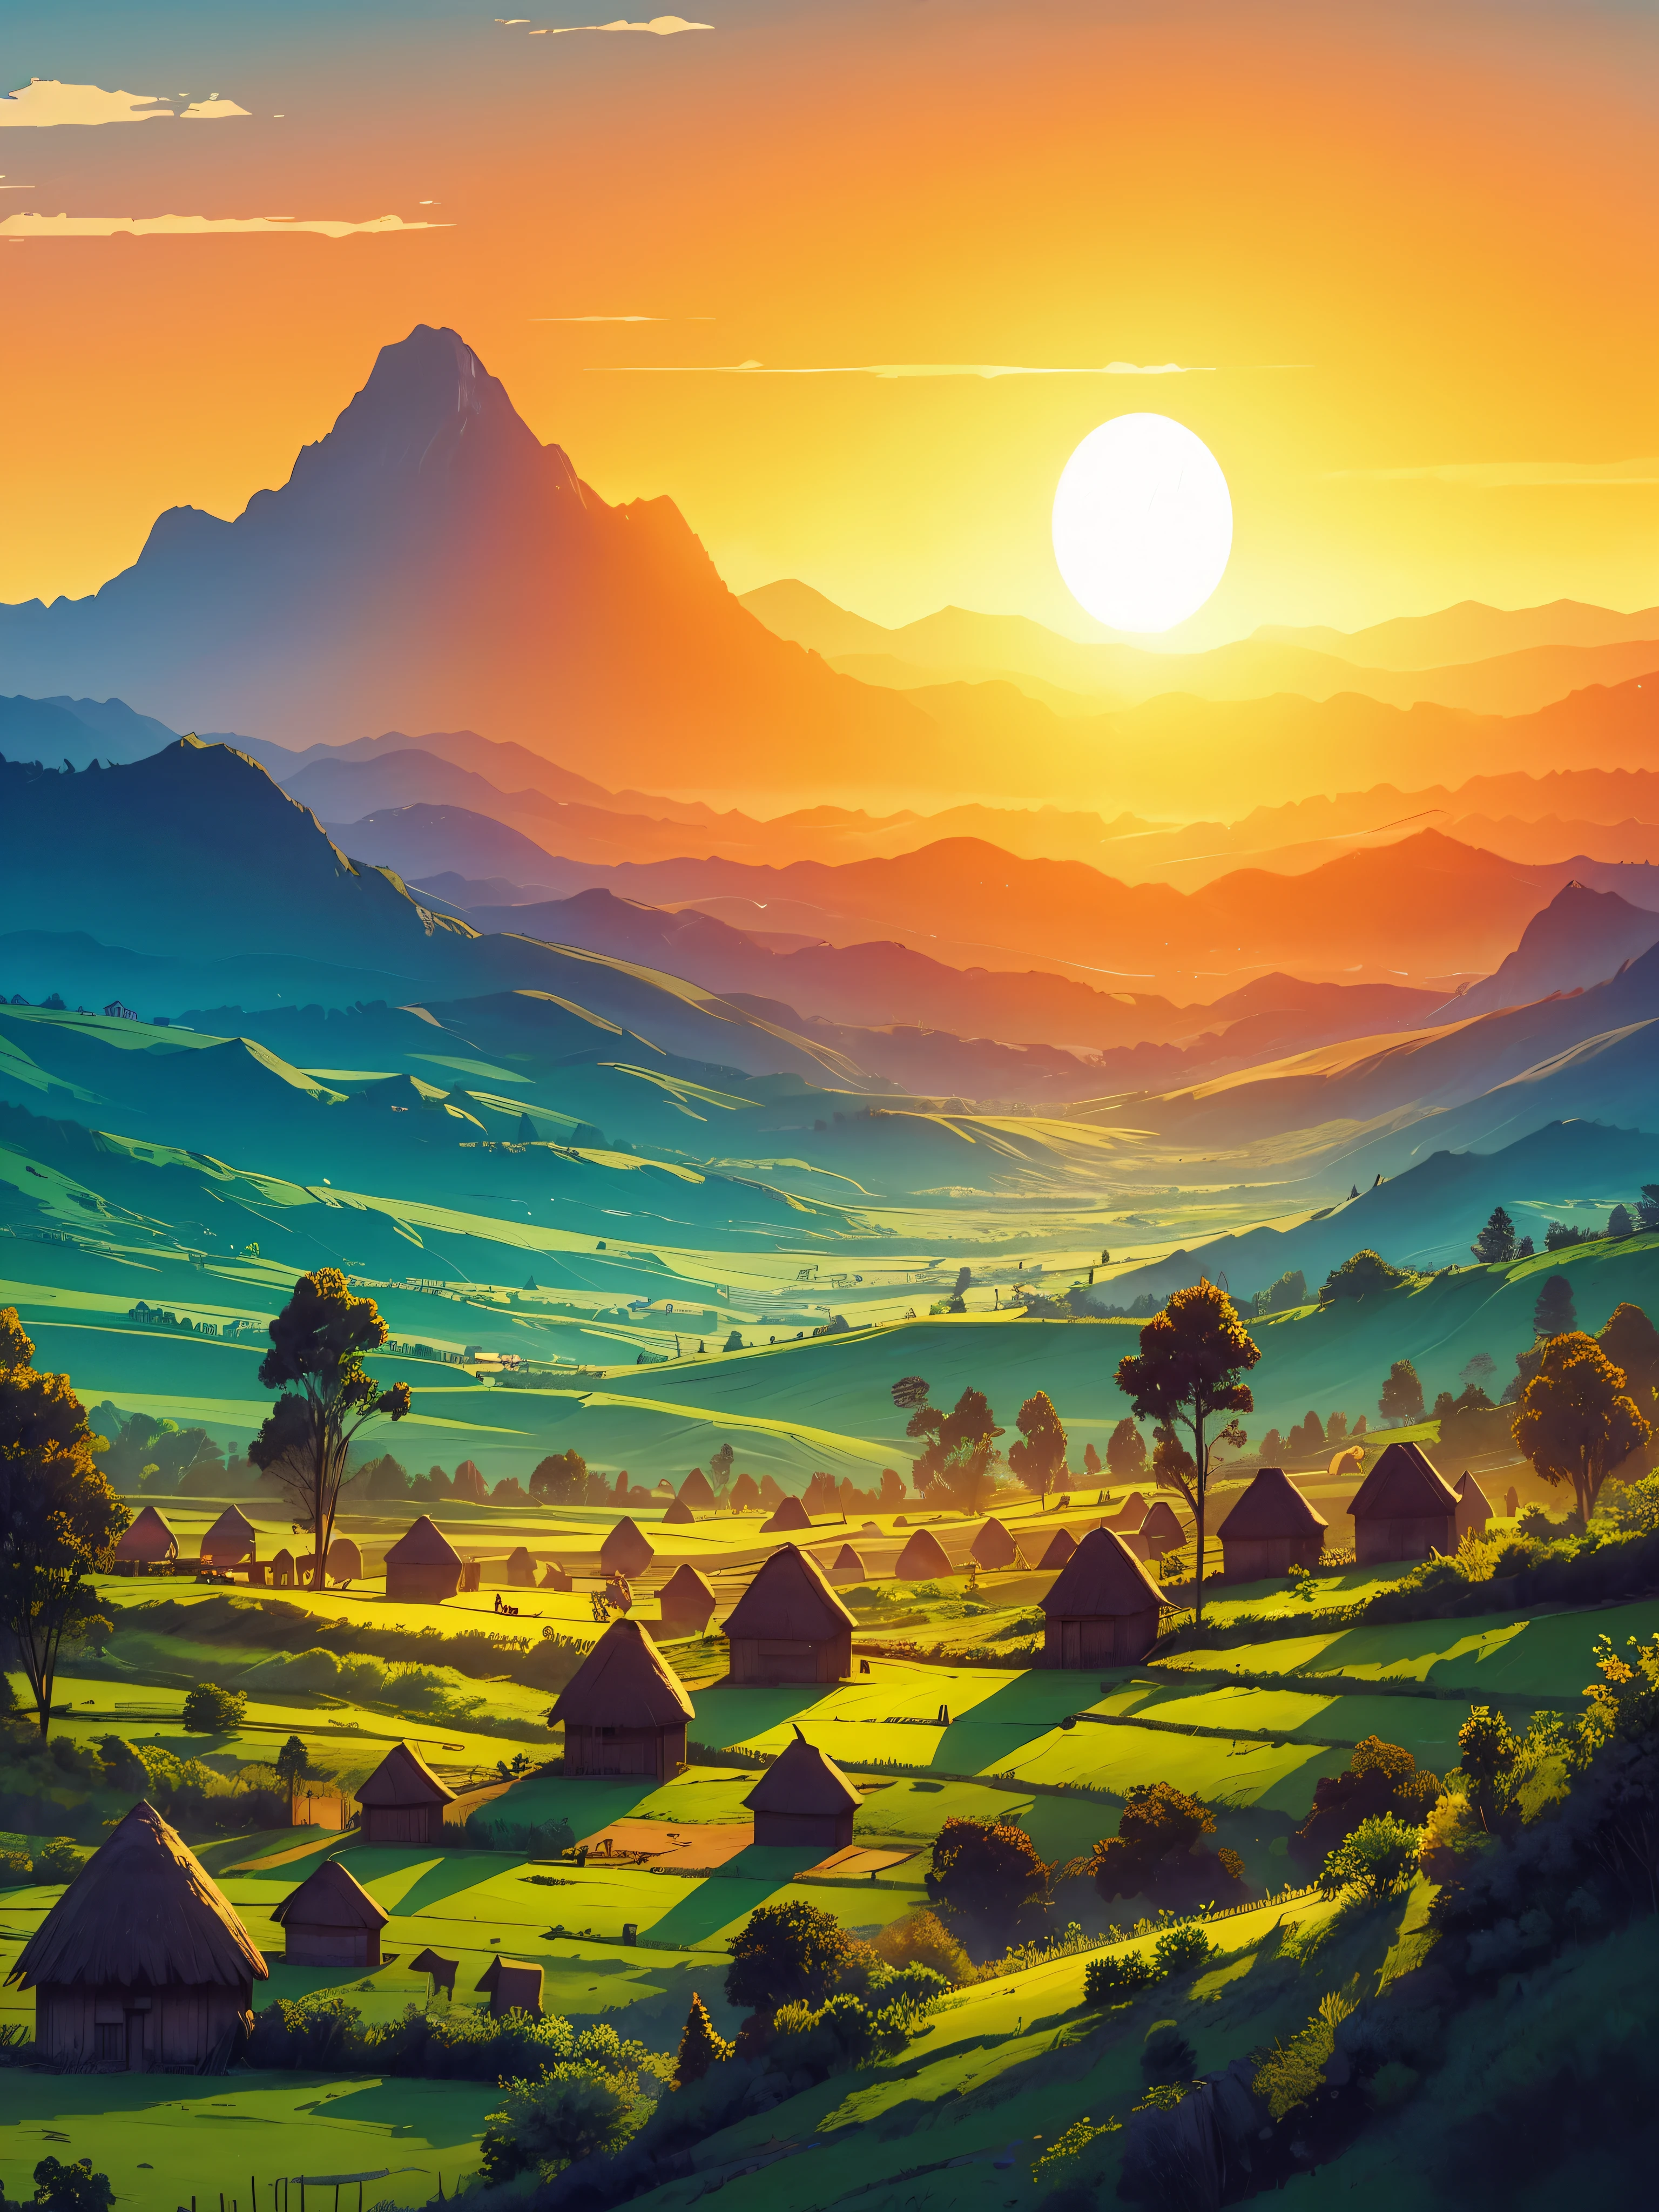 Draw a digital anime aerial simple art scene of Ethiopian sunset, a vast landscape unfolds, blending lush green fields with majestic mountains. Traditional huts dot the scene, as the fading sun bathes the panorama in warm hues, no humans and cattle, vibrant color tones